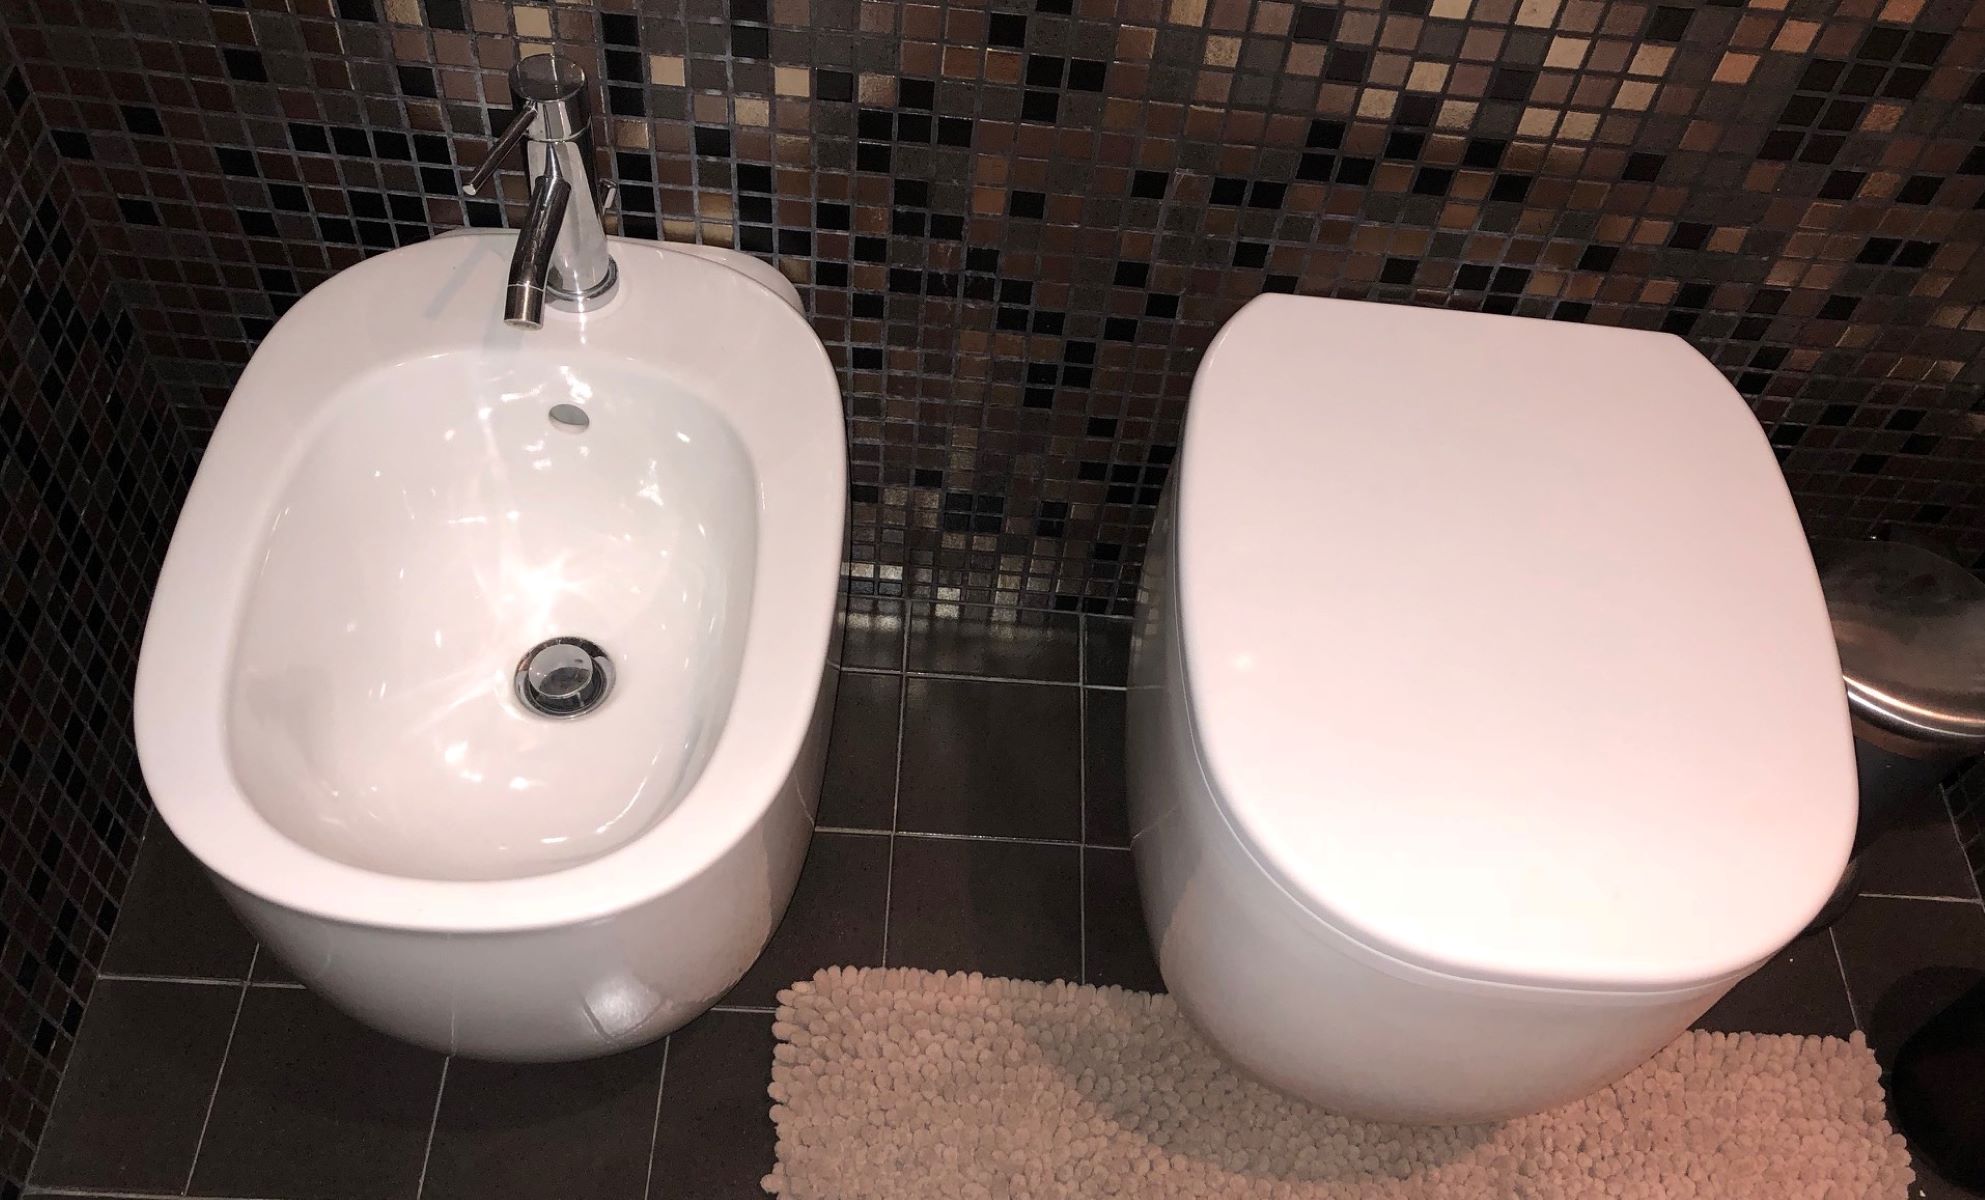 How To Use Bidet In Italy